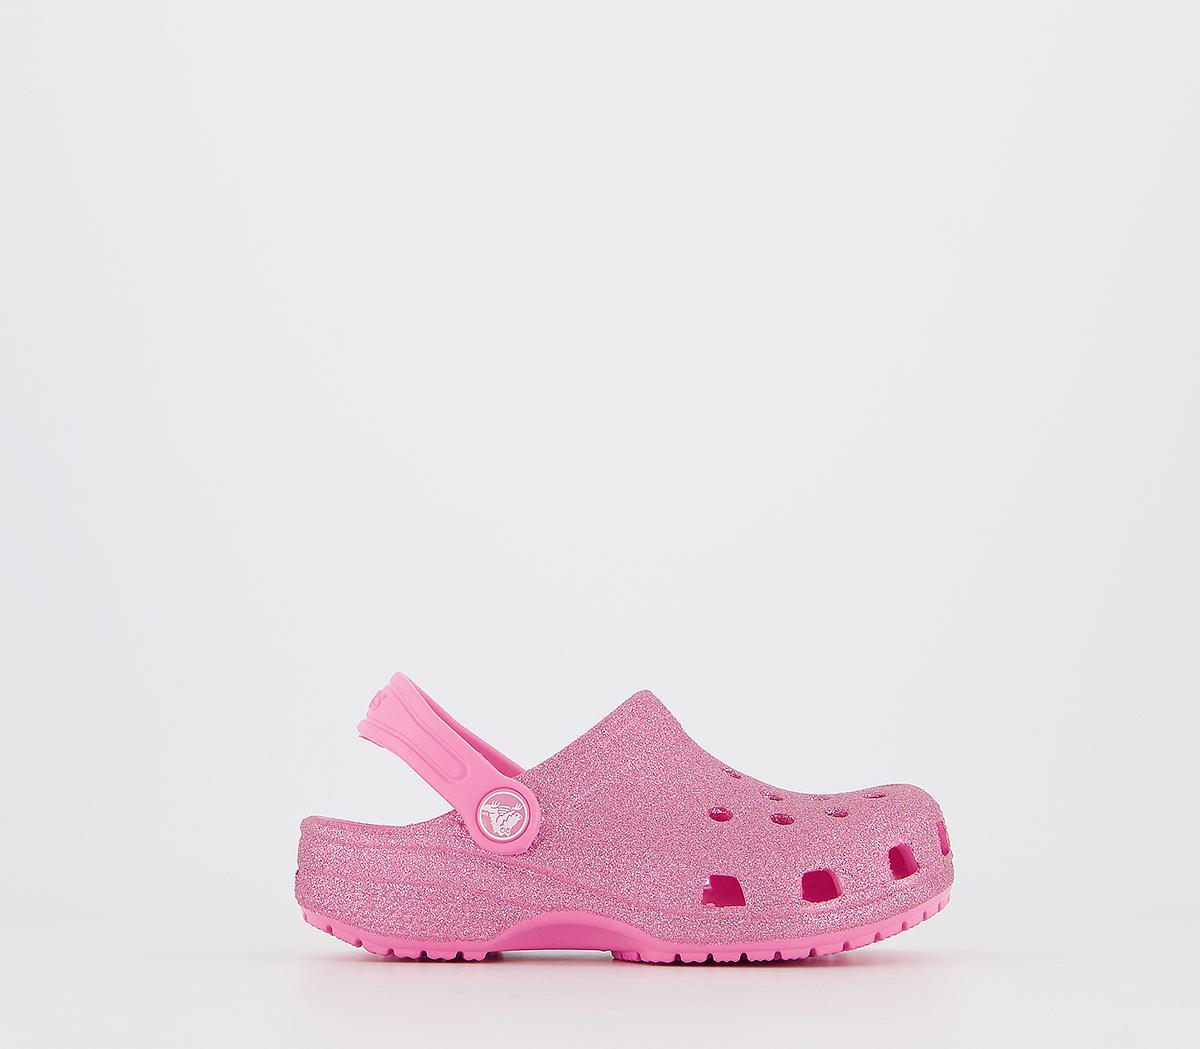 pink crocs without holes